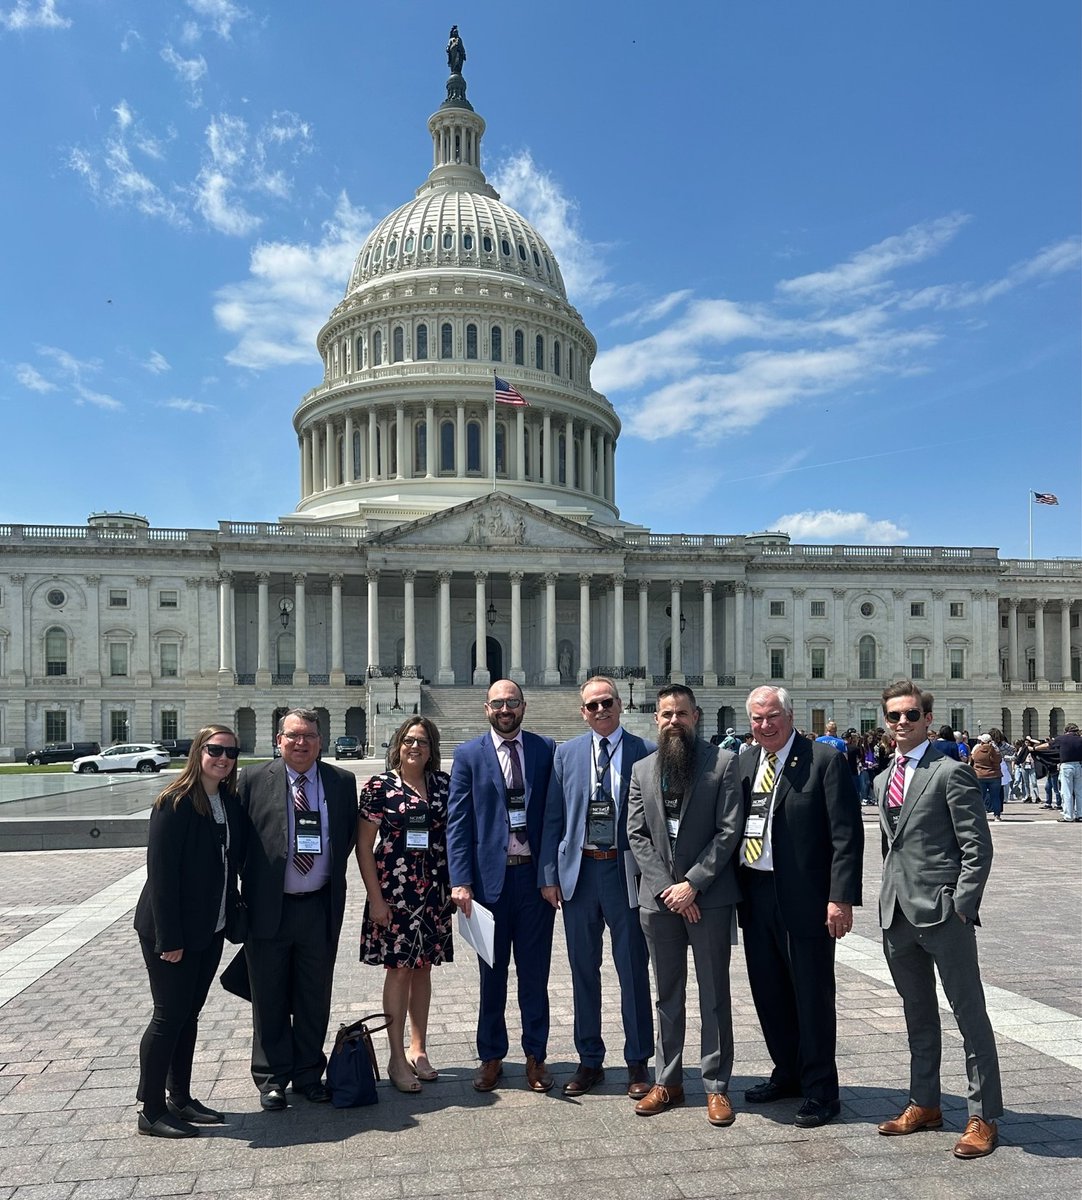 An Iowa delegation was recently at #NCPAontheHill advocating for the pharmacy profession.

L to R: Caitlin Rohrbaugh, Don McGuire, Kristen Jones, Joe Greenwood, Matt Osterhaus, Brett Barker, Bob Greenwood, and Seth Brown